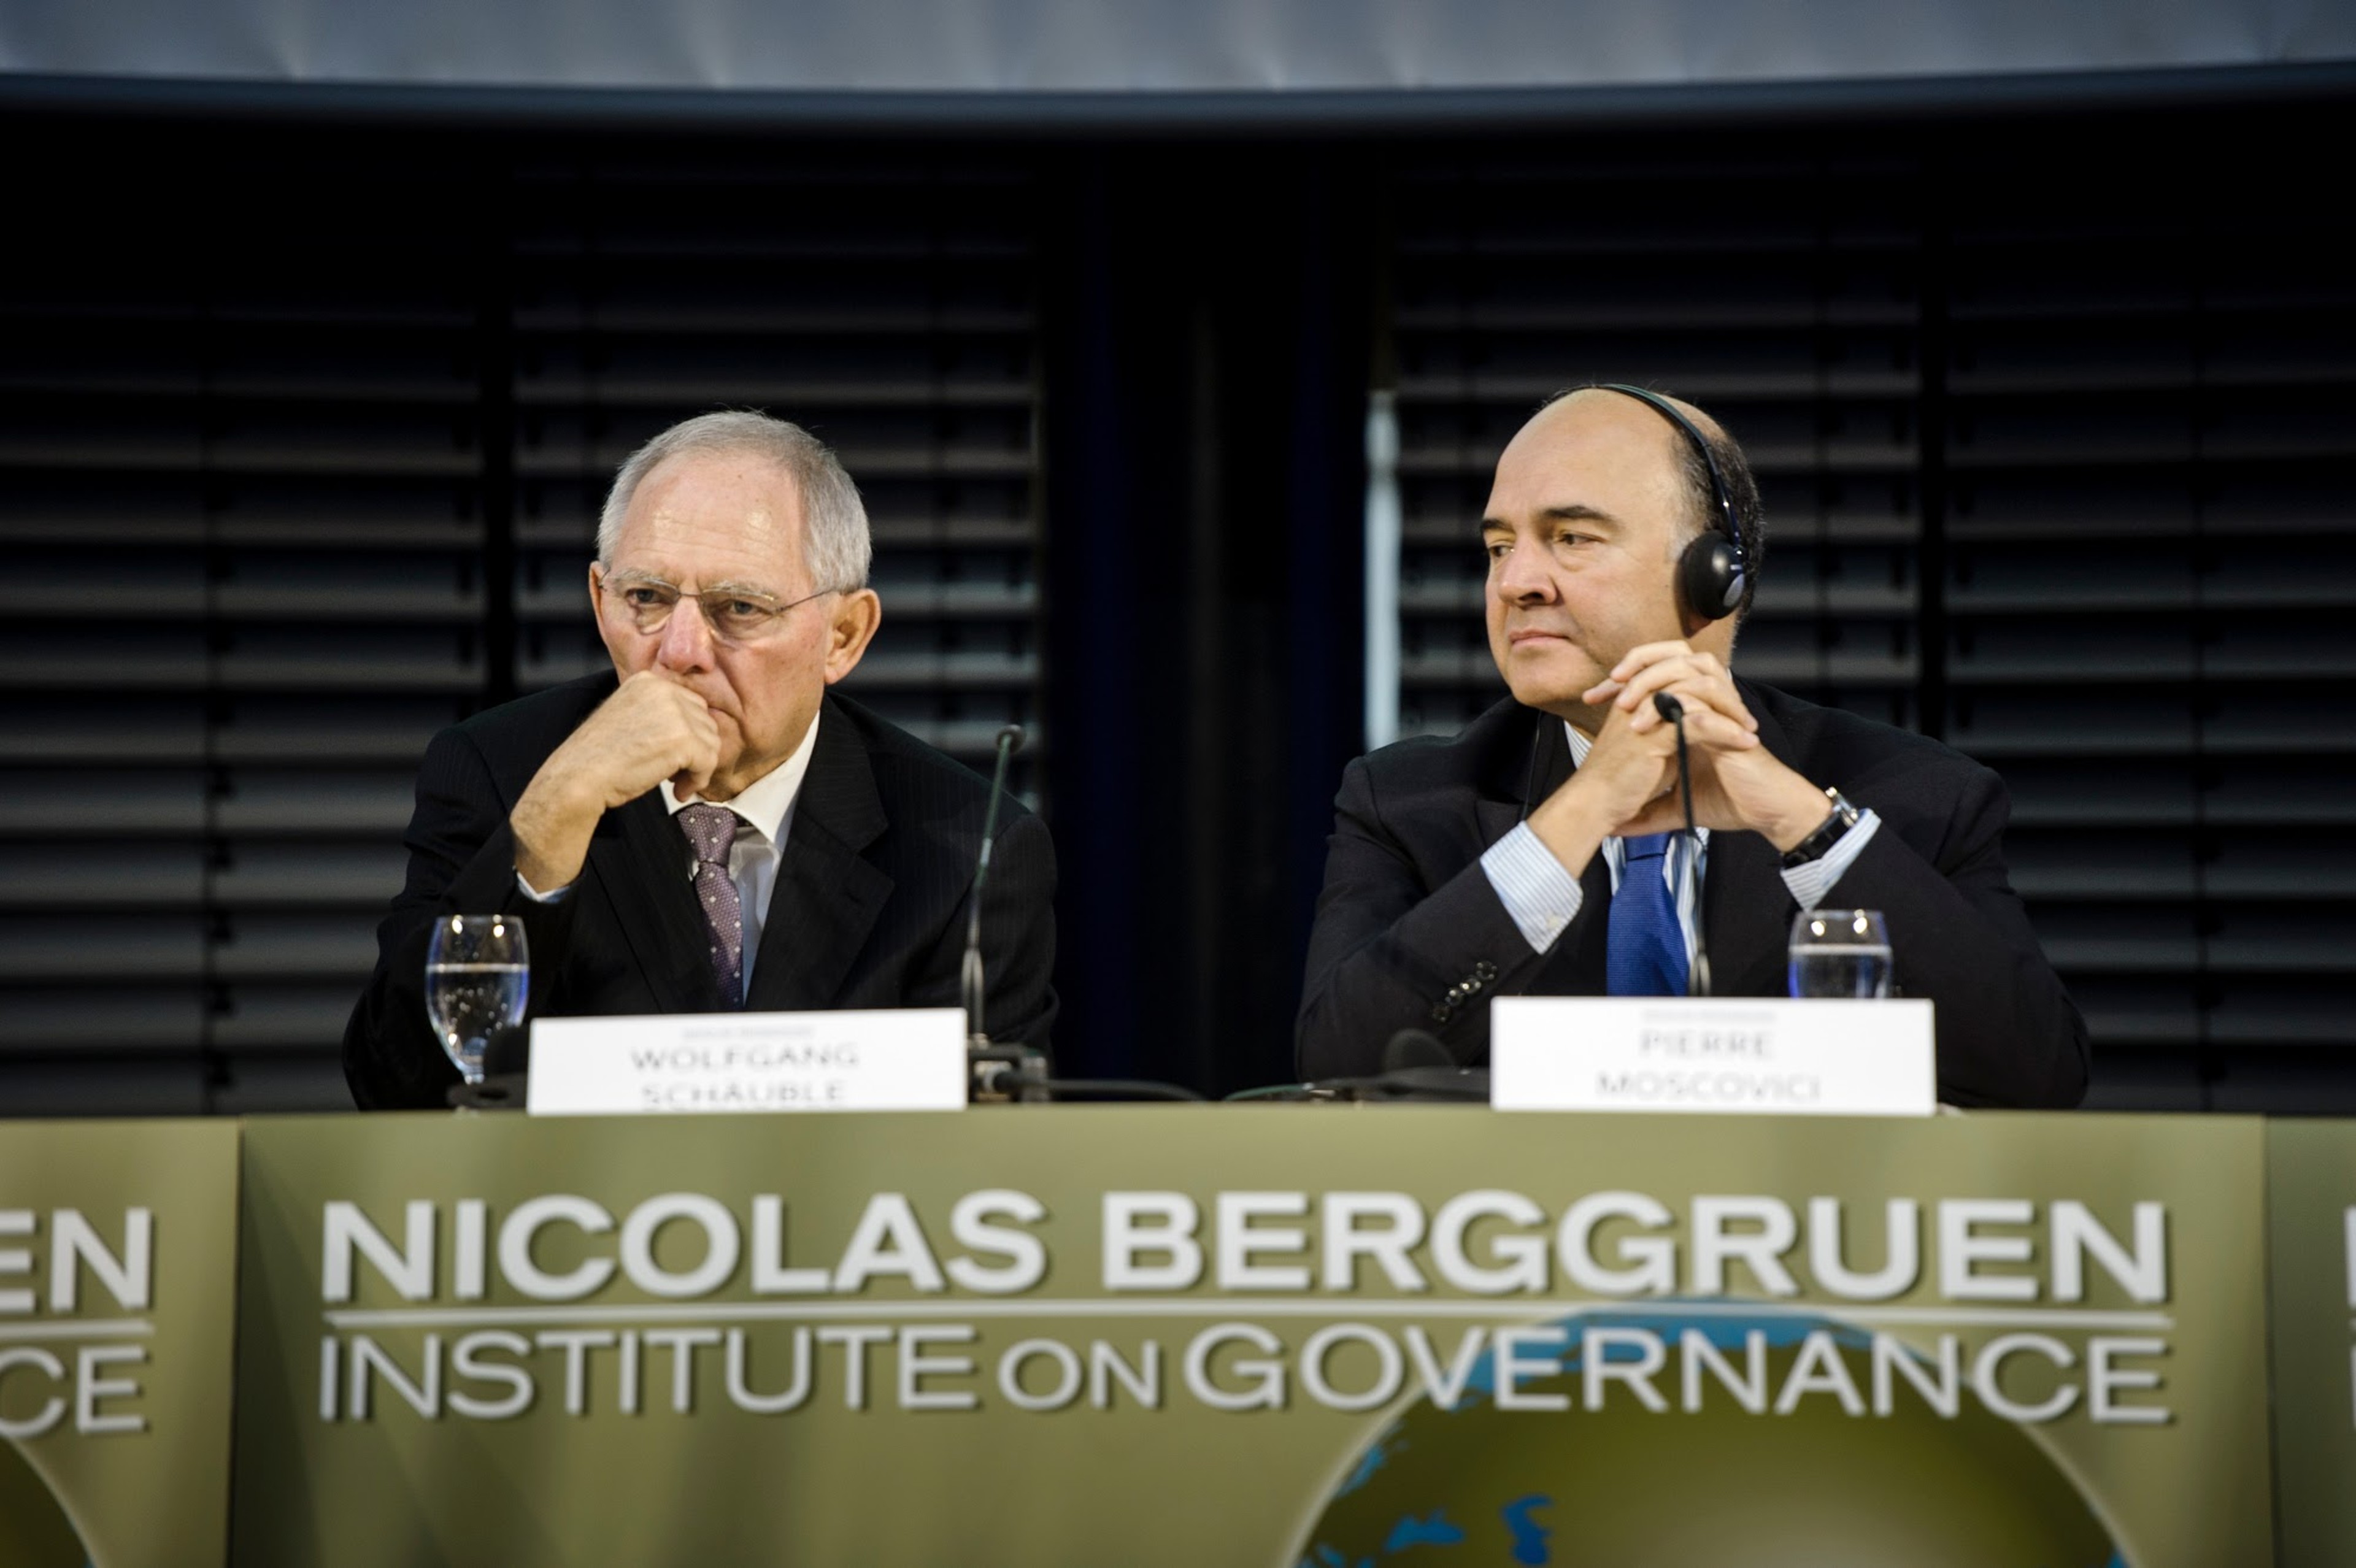 Wolfgang Schäuble and Pierre Moscovici at CFE Town Hall in Berlin